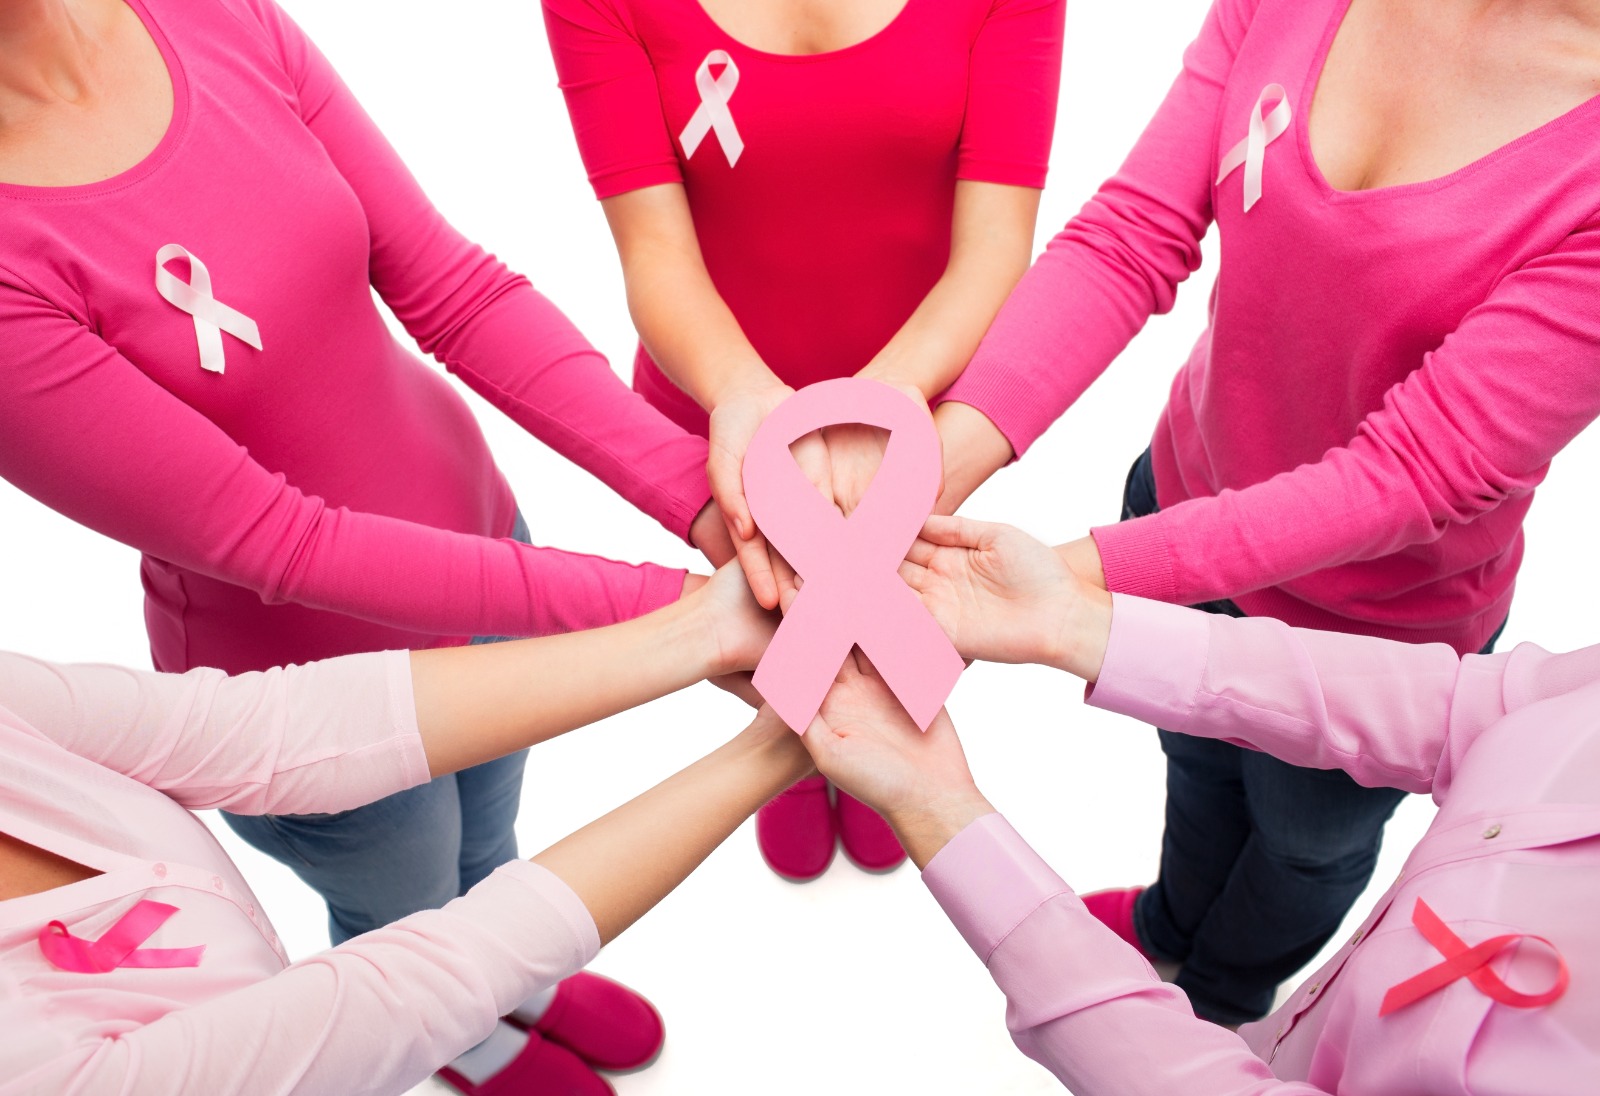 Breast Cancer Support